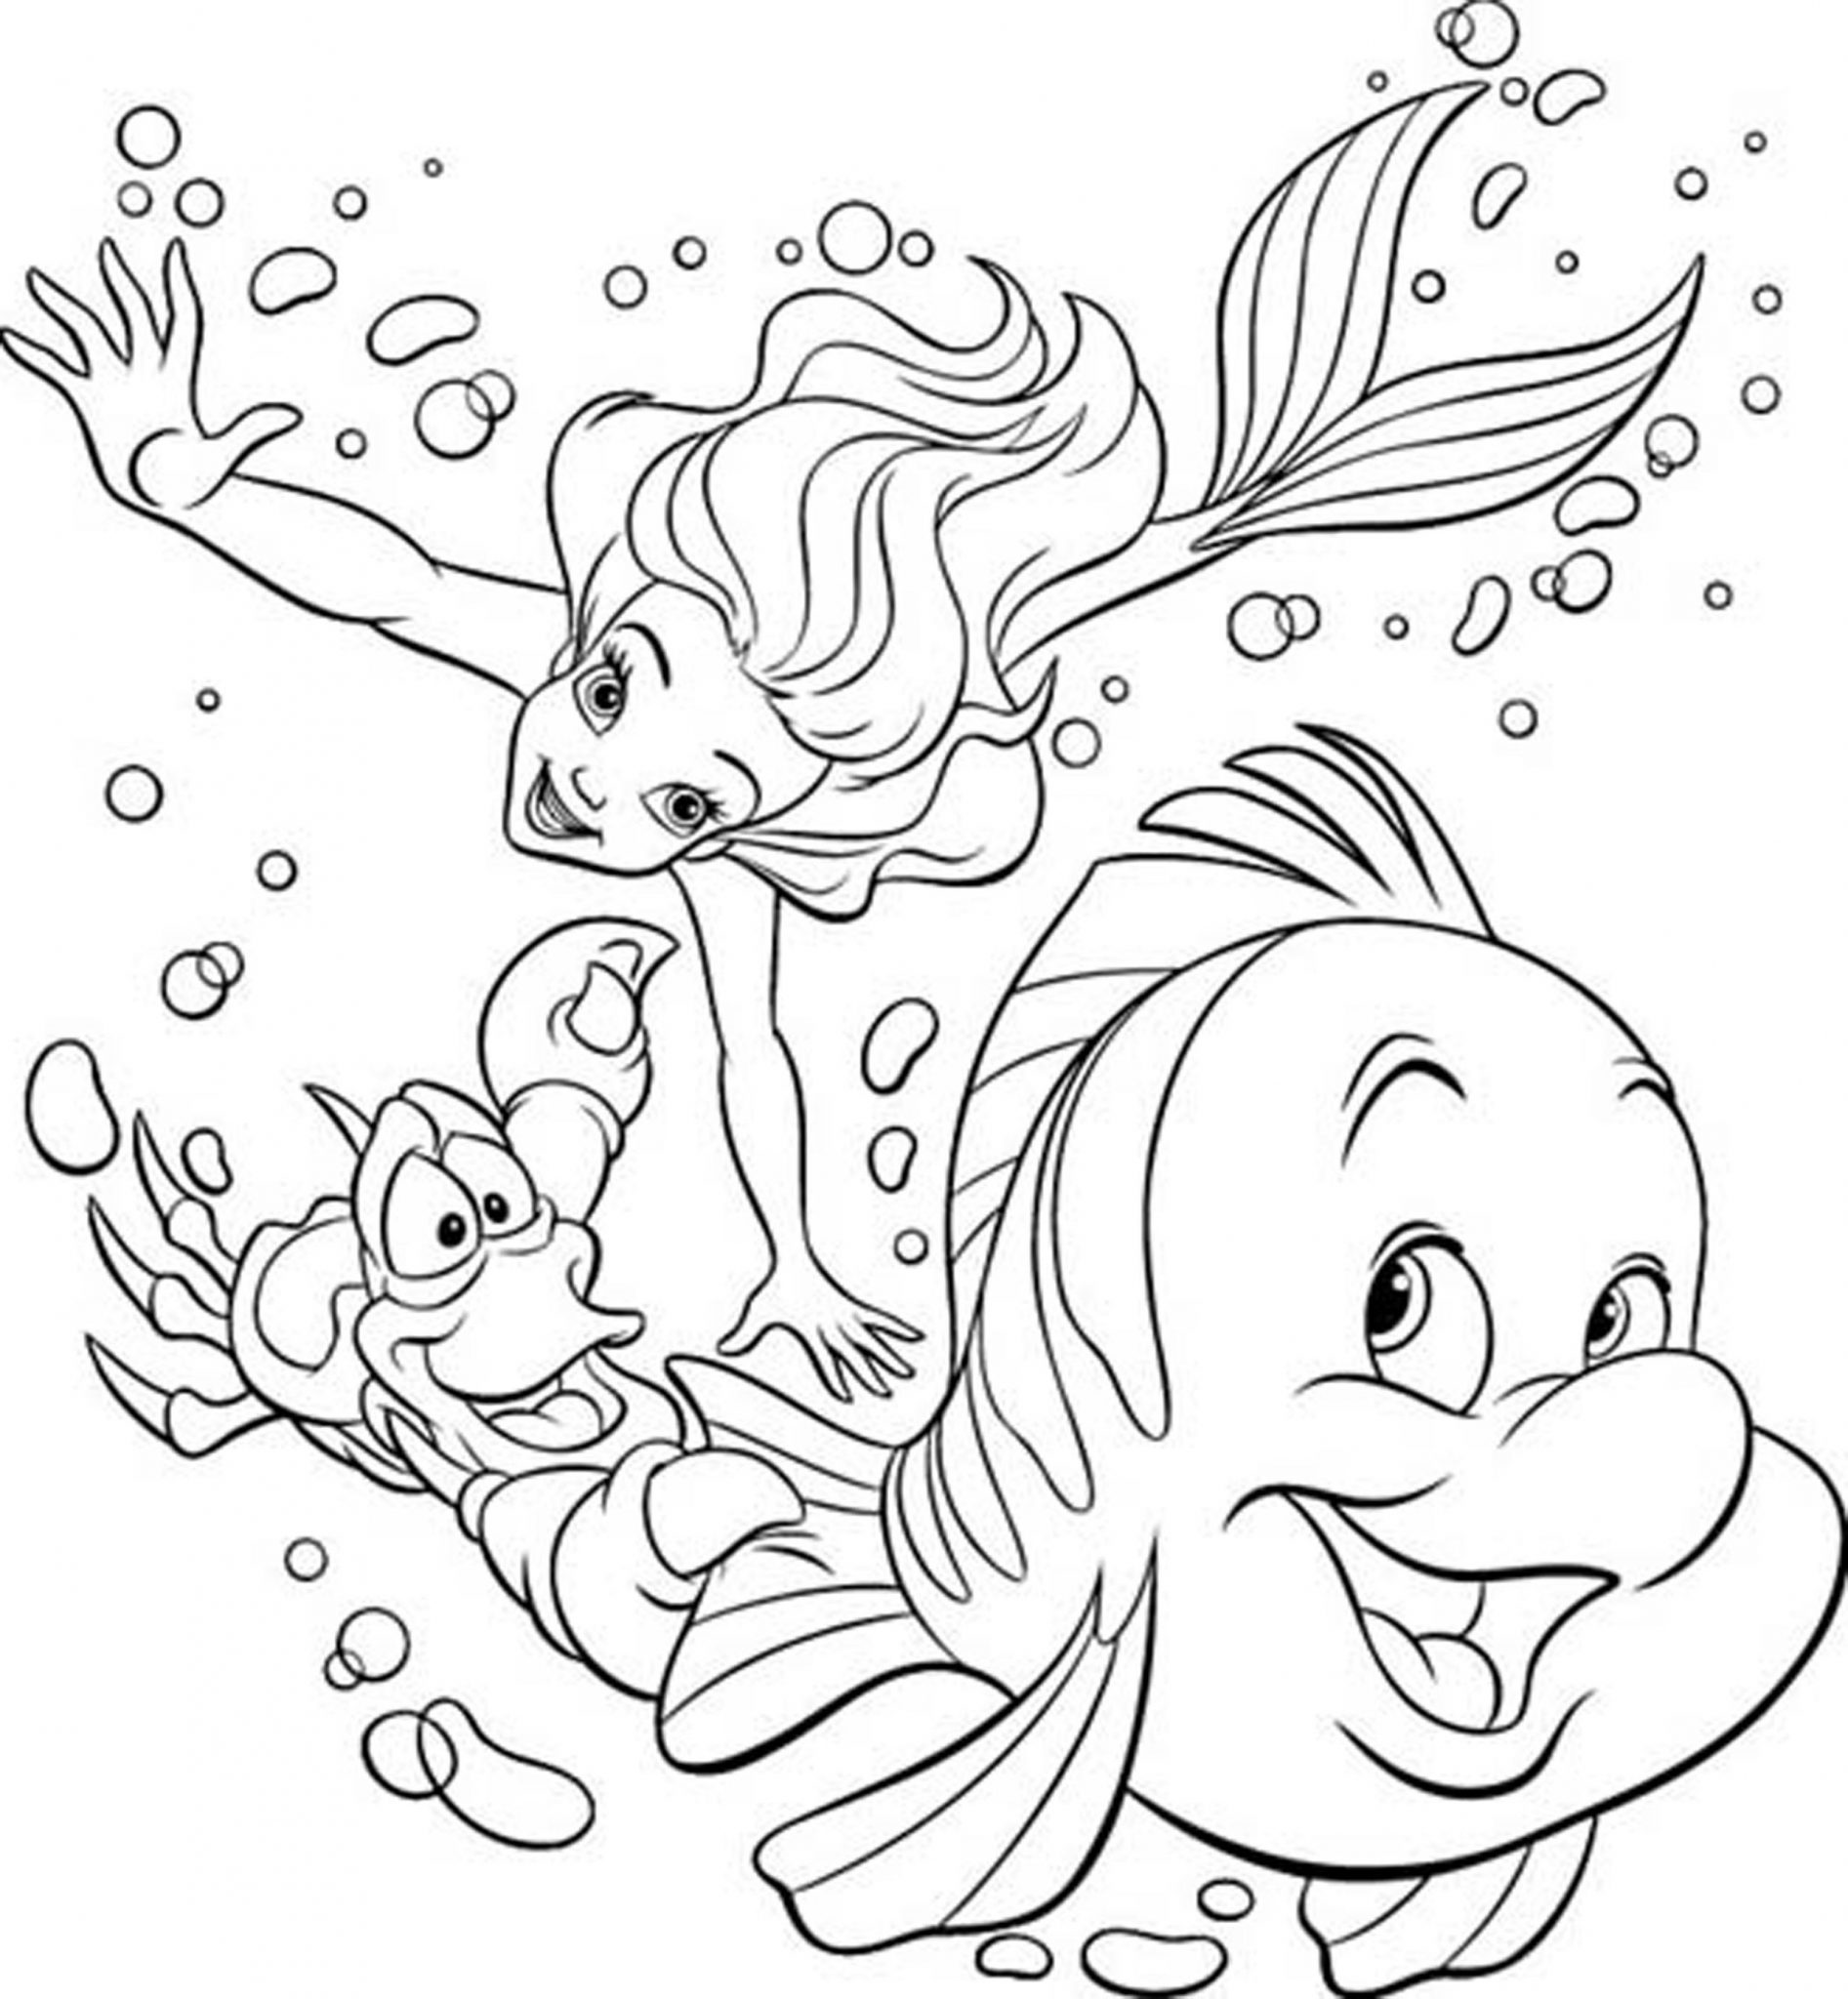 33-free-disney-coloring-pages-for-kids-baps